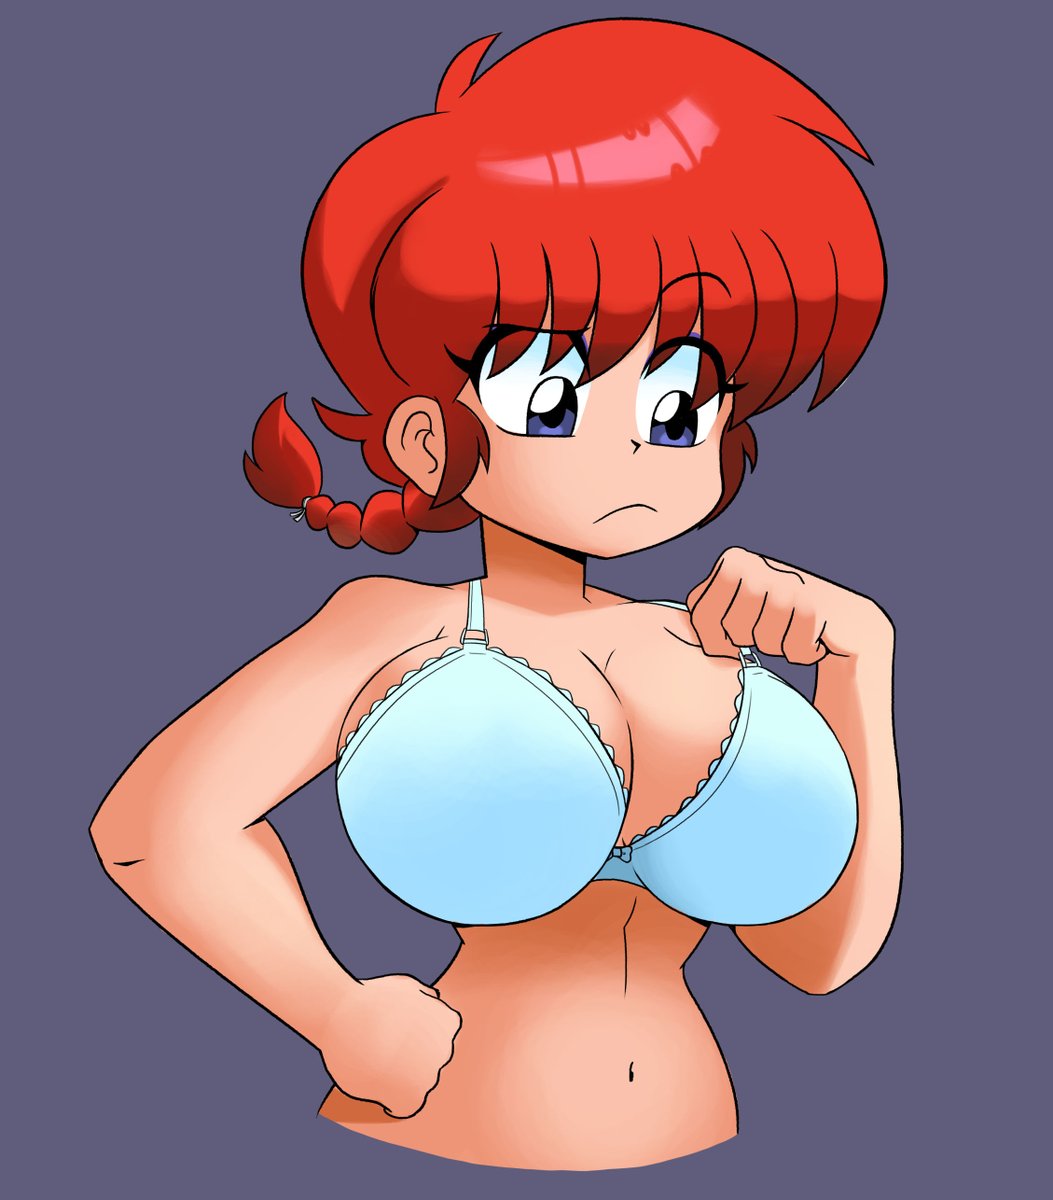 A fanart of my favorite anime Ranma 1/2, do your remember her? #ranma. #dib...